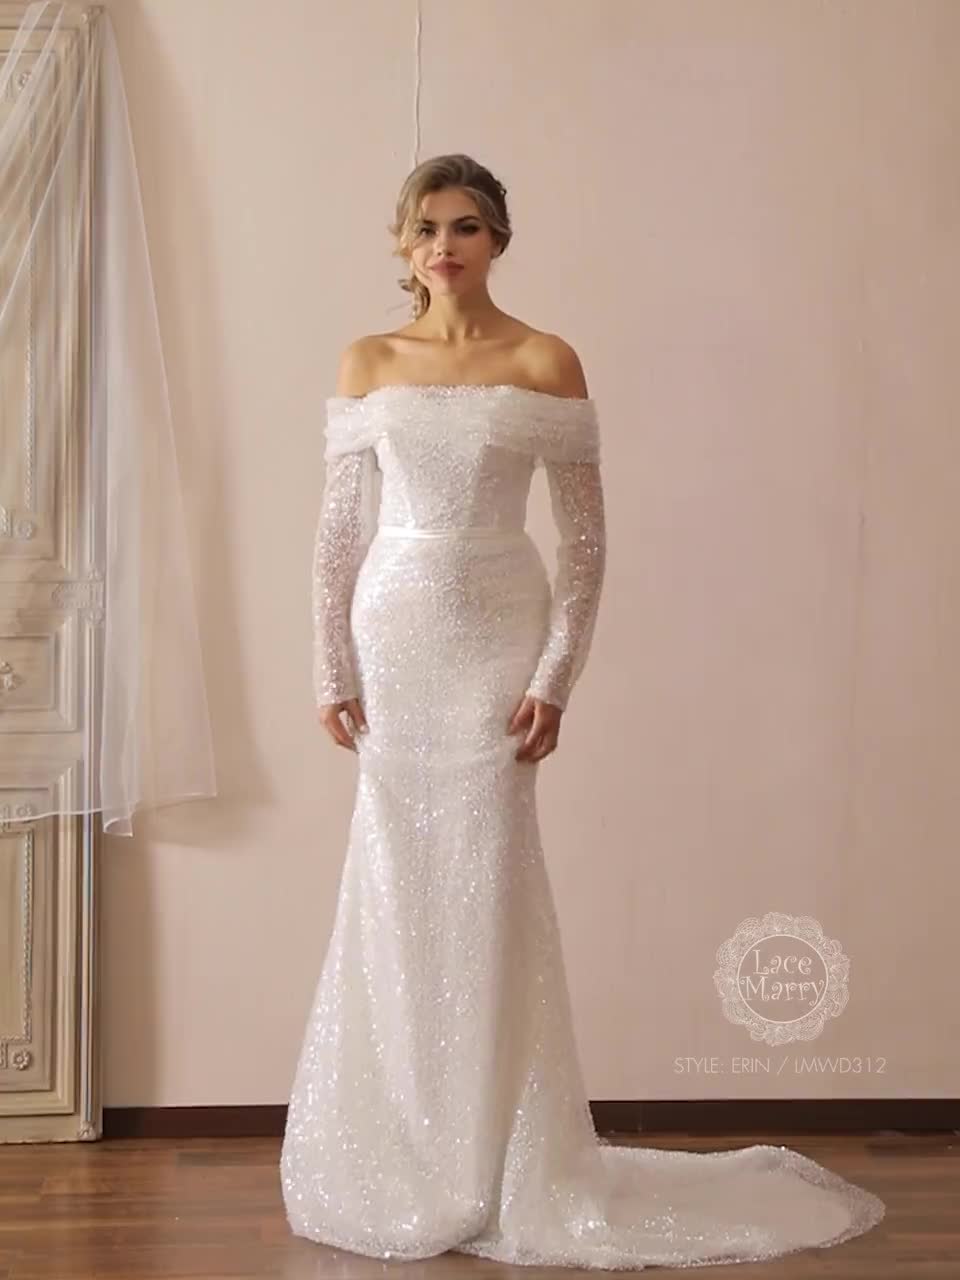 ERIN / Sparkling Wedding Dress with Off the Shoulder Long Sleeves -  LaceMarry